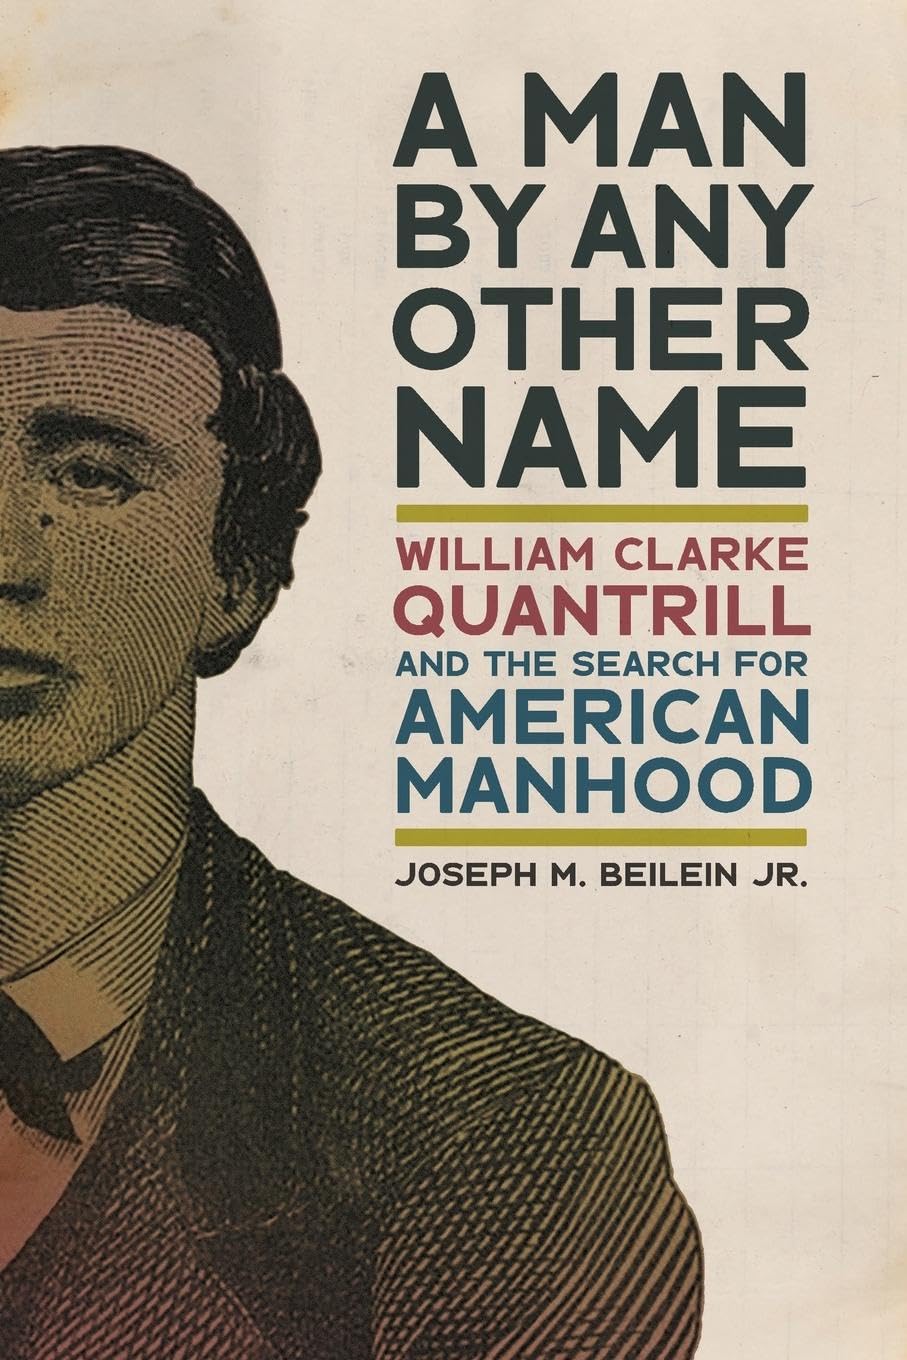 A Man By Any Other Name: William Clarke Quantrill and the Search for American Manhood book cover